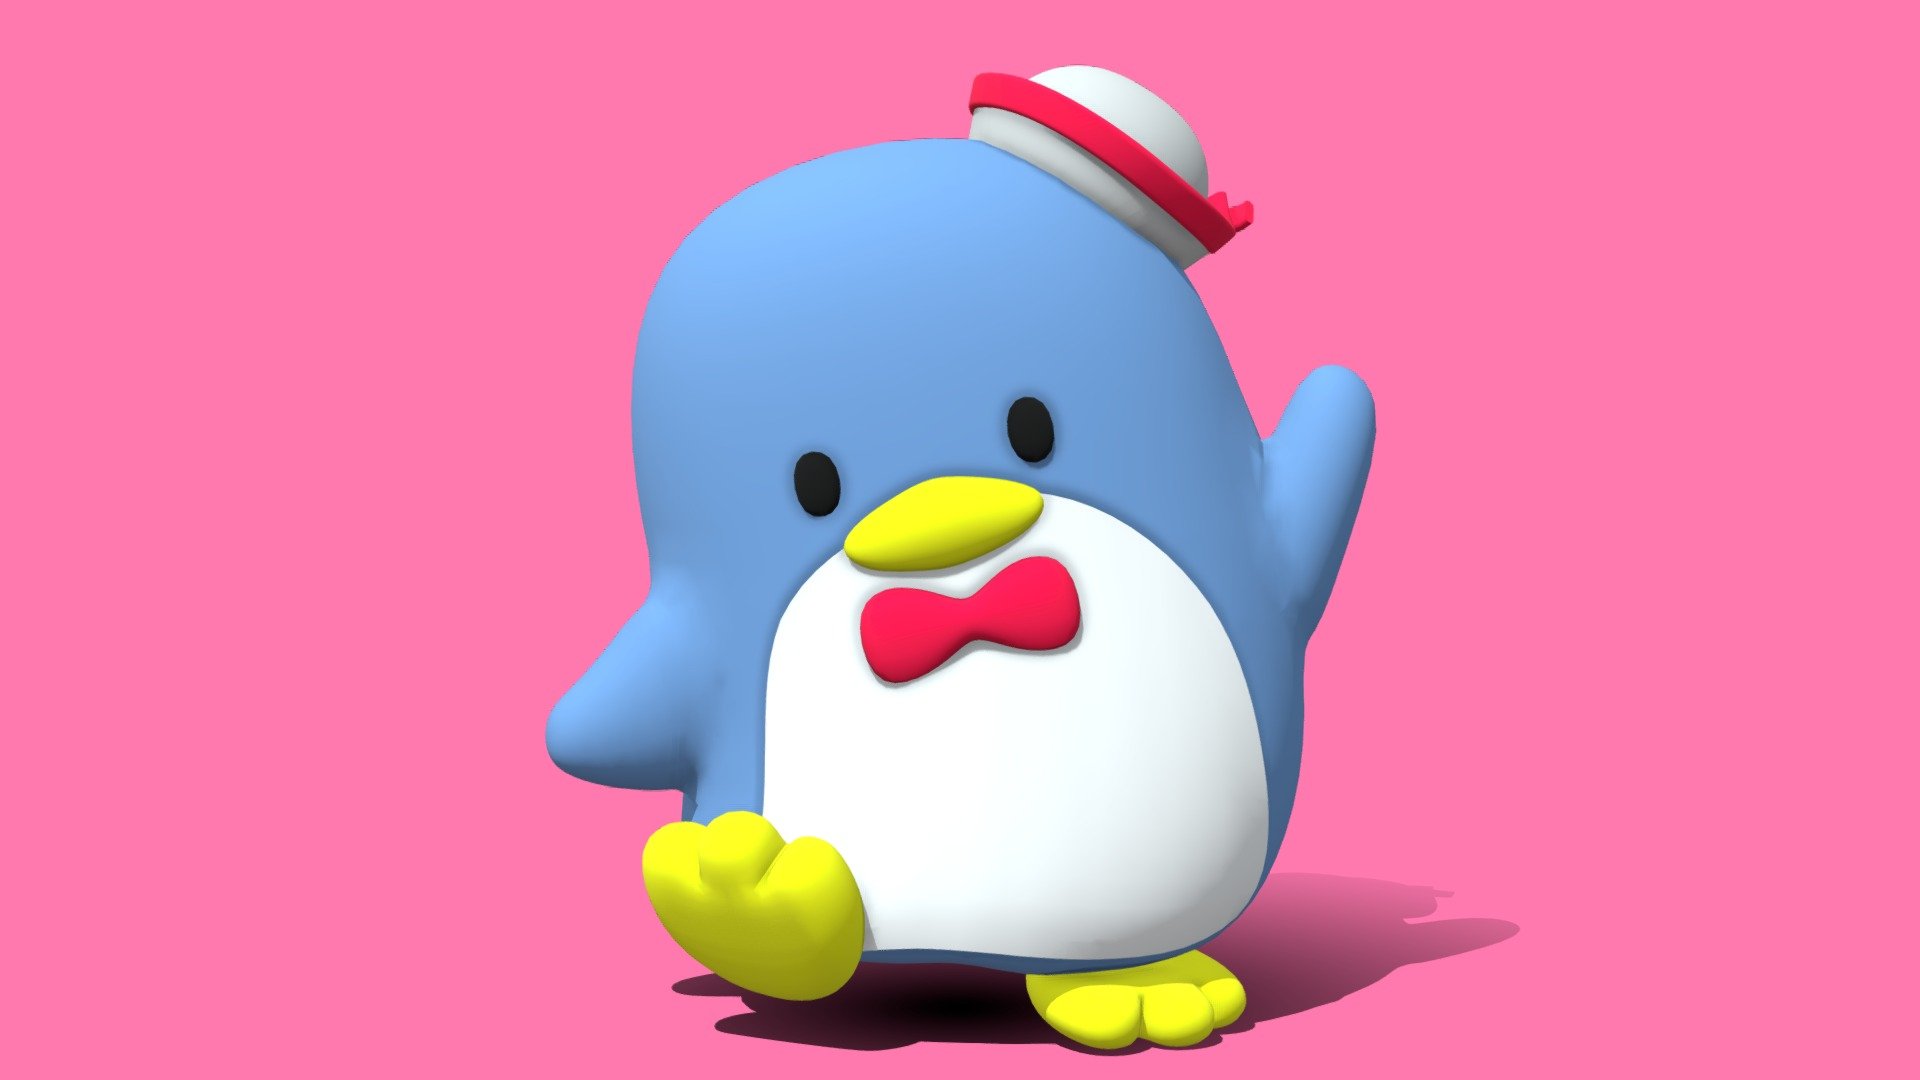 A simple and cute 3D model of popular Sanrio character Tuxedo Sam. This model is free because it is in a static pose and there are some rough areas in the topology around the arms. But this model should still be perfectly fine for 3D printing and other uses!

File Formats




OBJ

Not Rigged

Polygons:
15,390

Vertices:
7,813 - Sanrio Tuxedo Sam 3D Model - Download Free 3D model by SirSquiggles 3d model